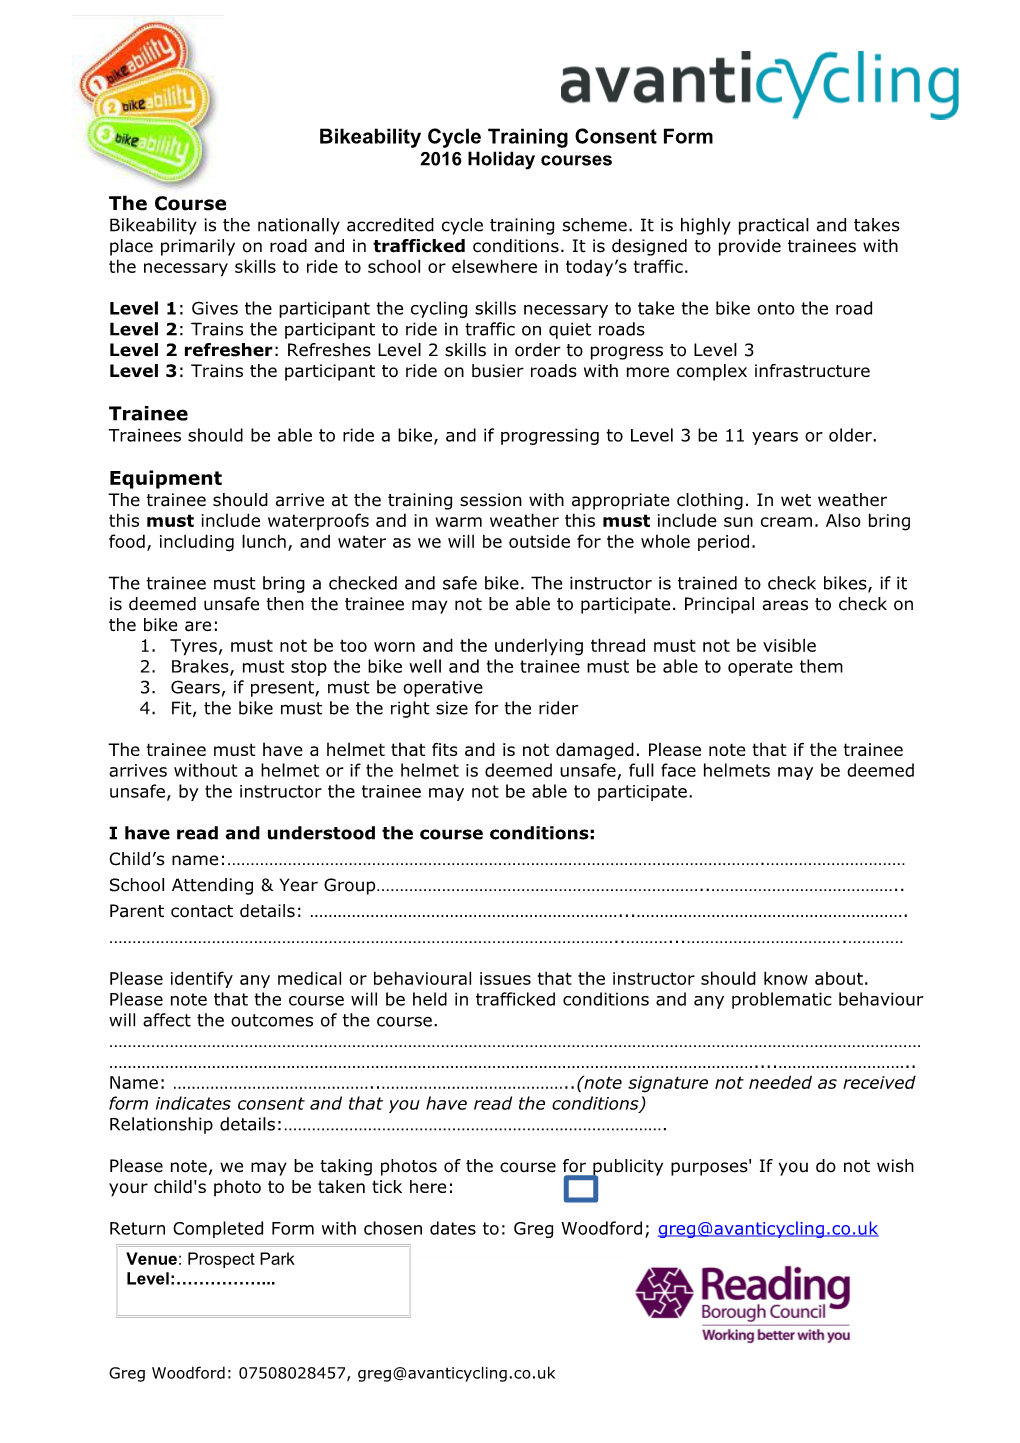 On Road Training Standard Consent Form